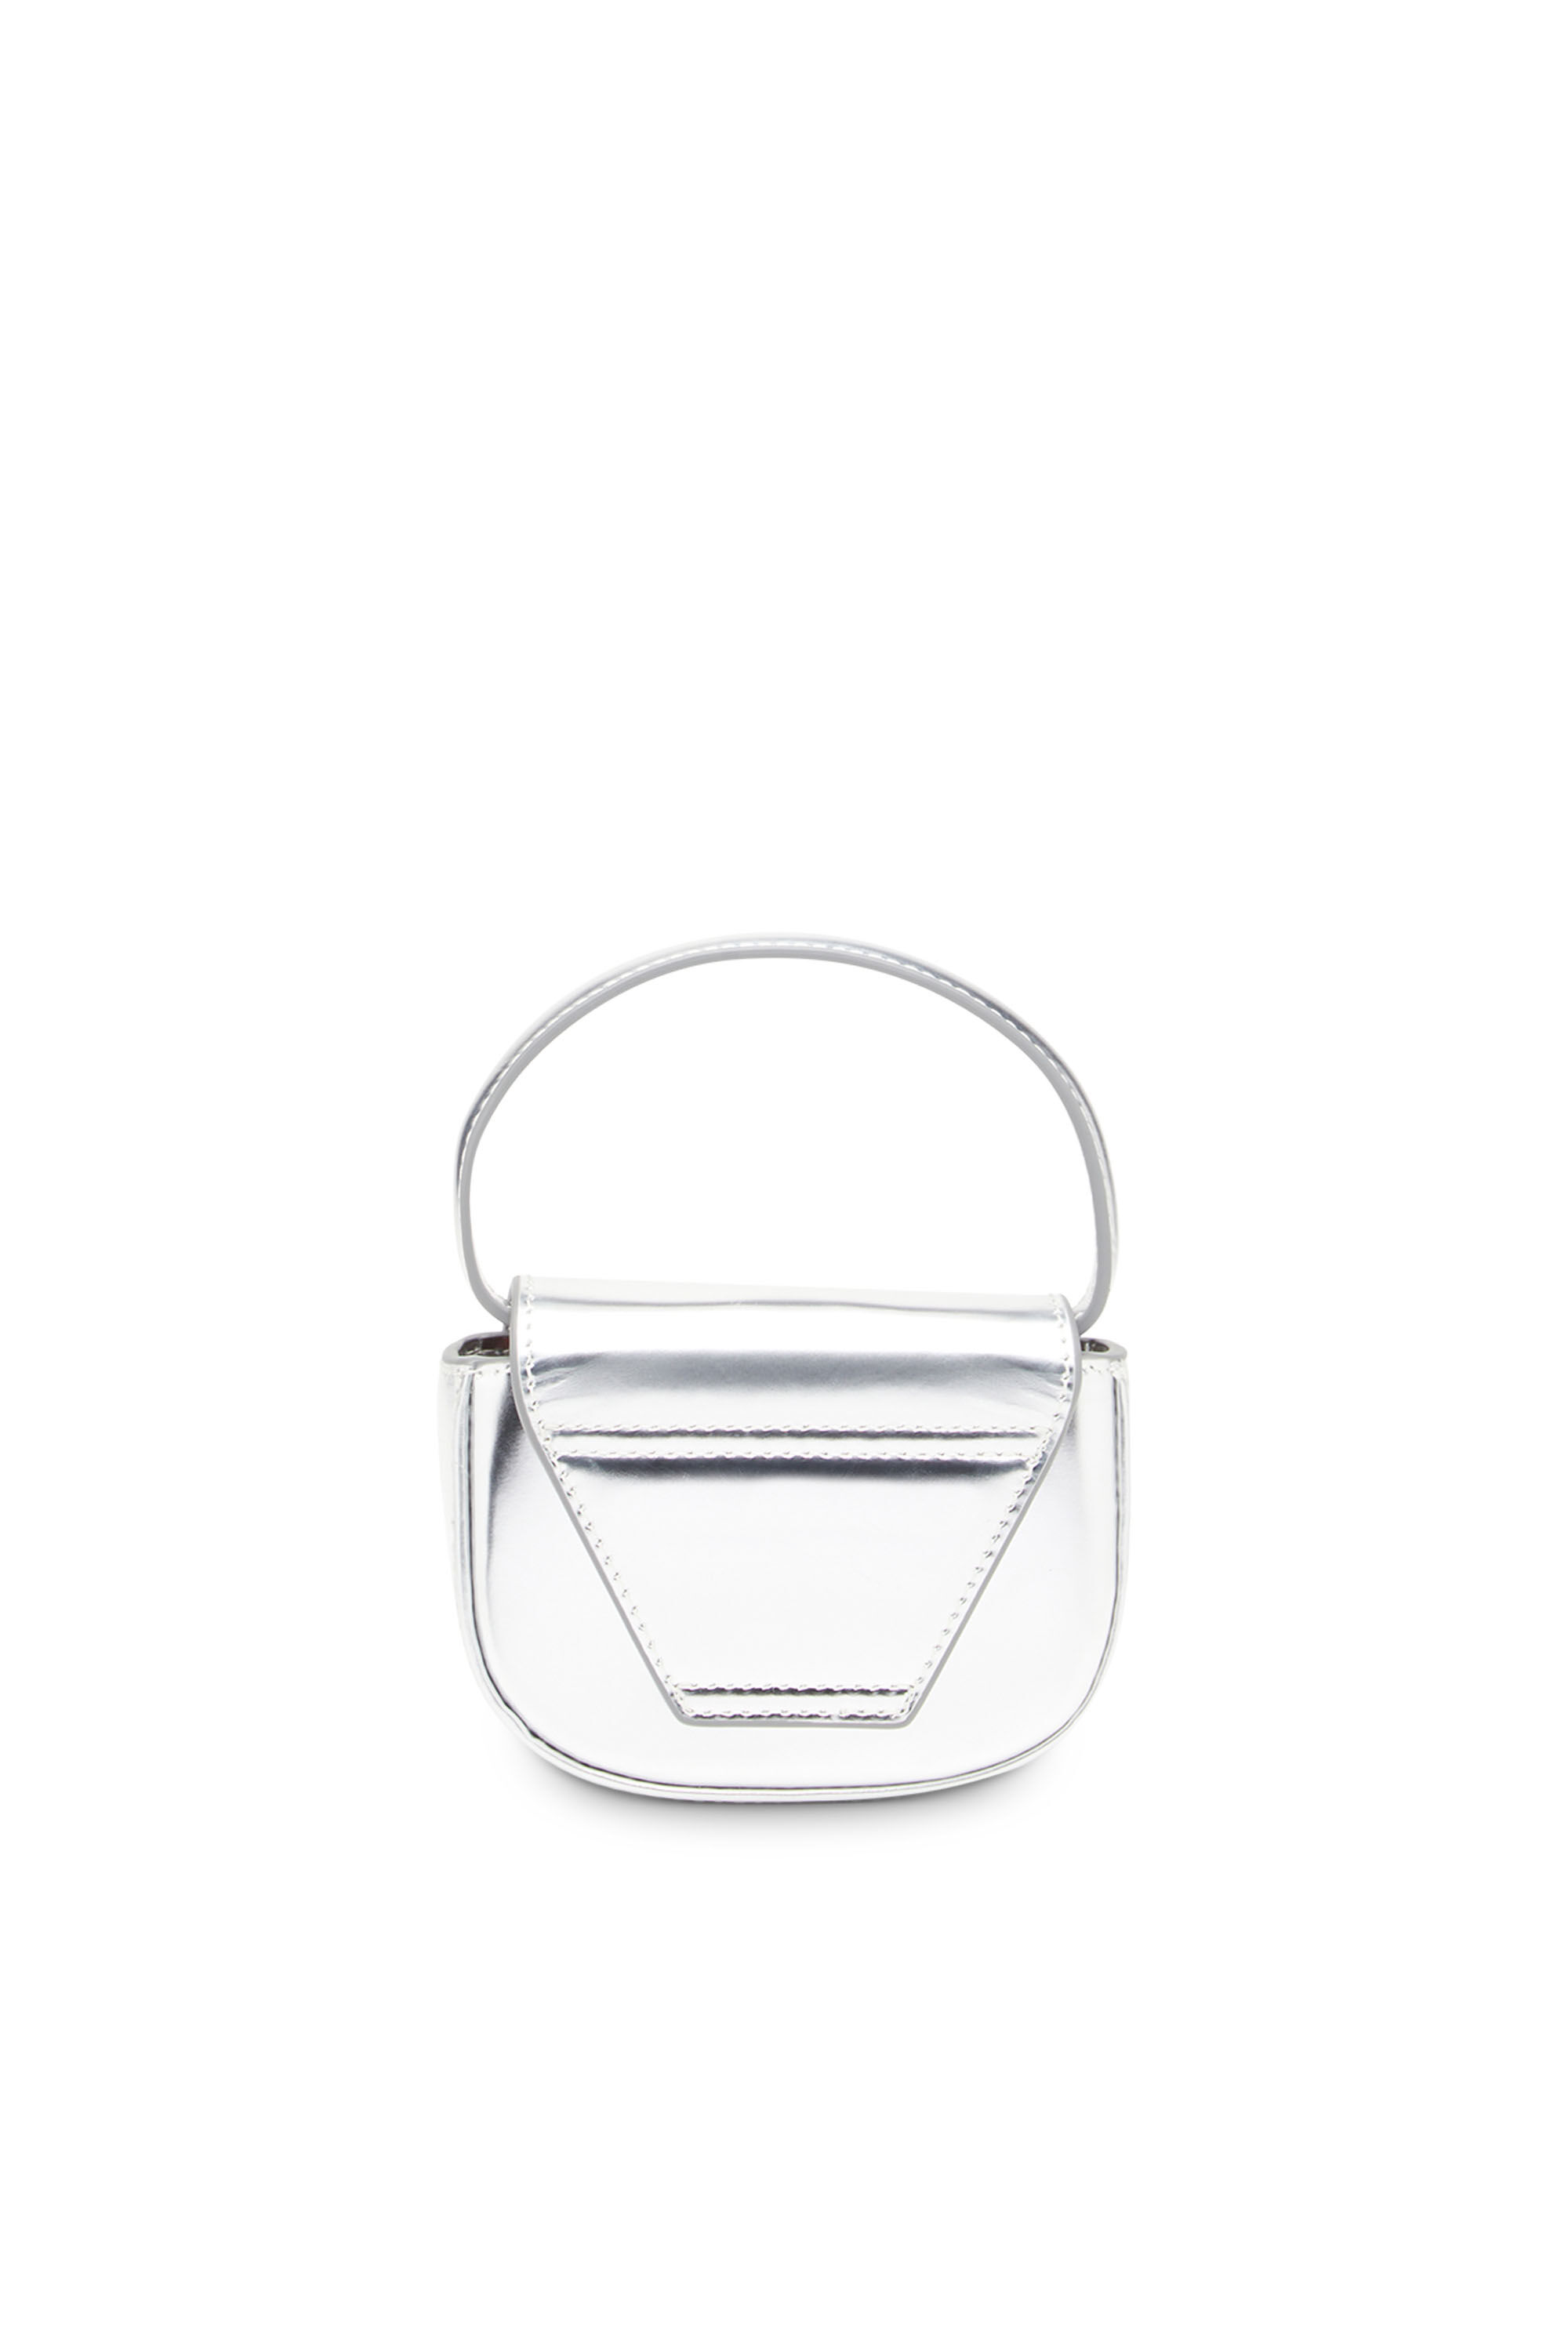 Diesel - 1DR-XS-S, Woman 1DR-XS-S-Iconic mini bag in mirrored leather in Silver - Image 3